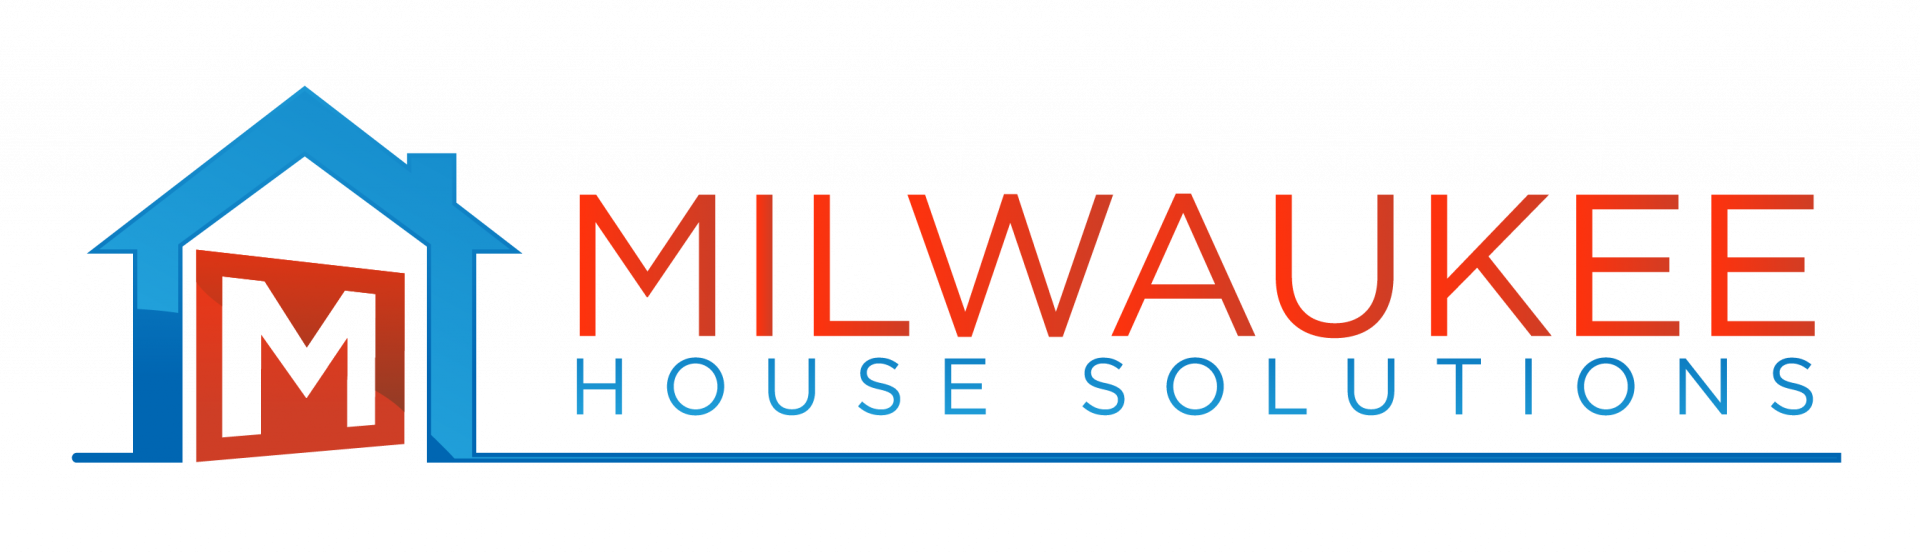 We Buy Houses Milwaukee | Sell My House | Cash For Your Home logo